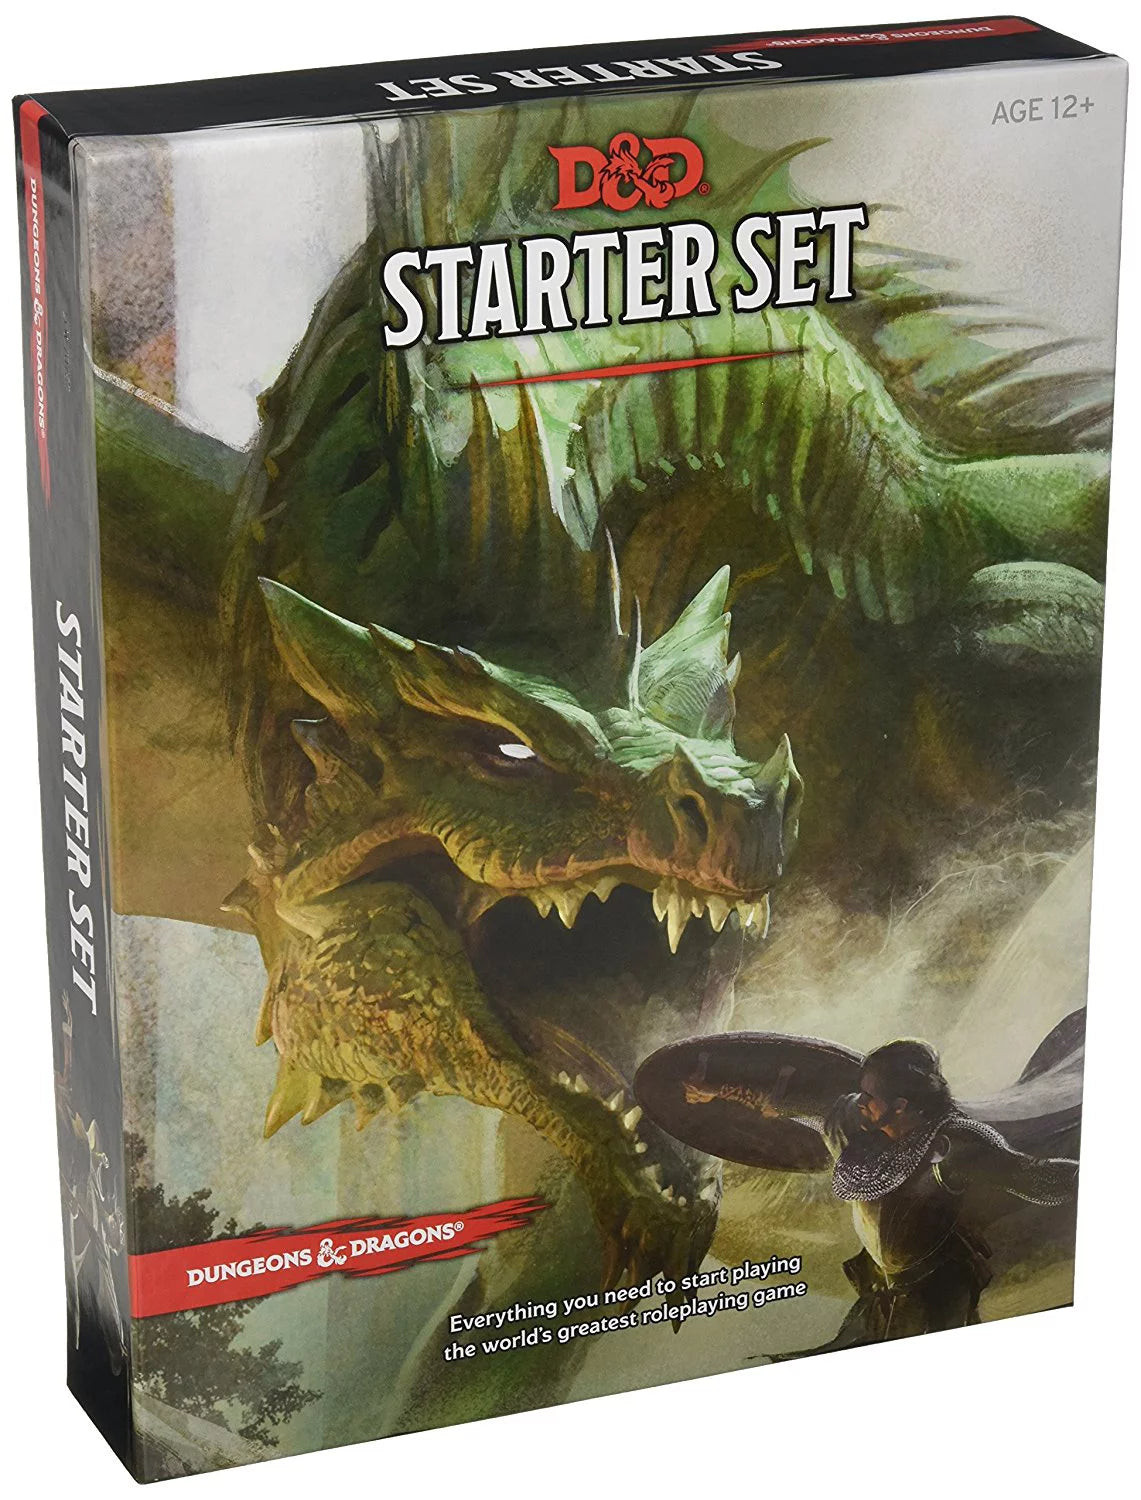 Dungeons & Dragons Starter Set - D&D 5e RPG Wizards of the Coast 